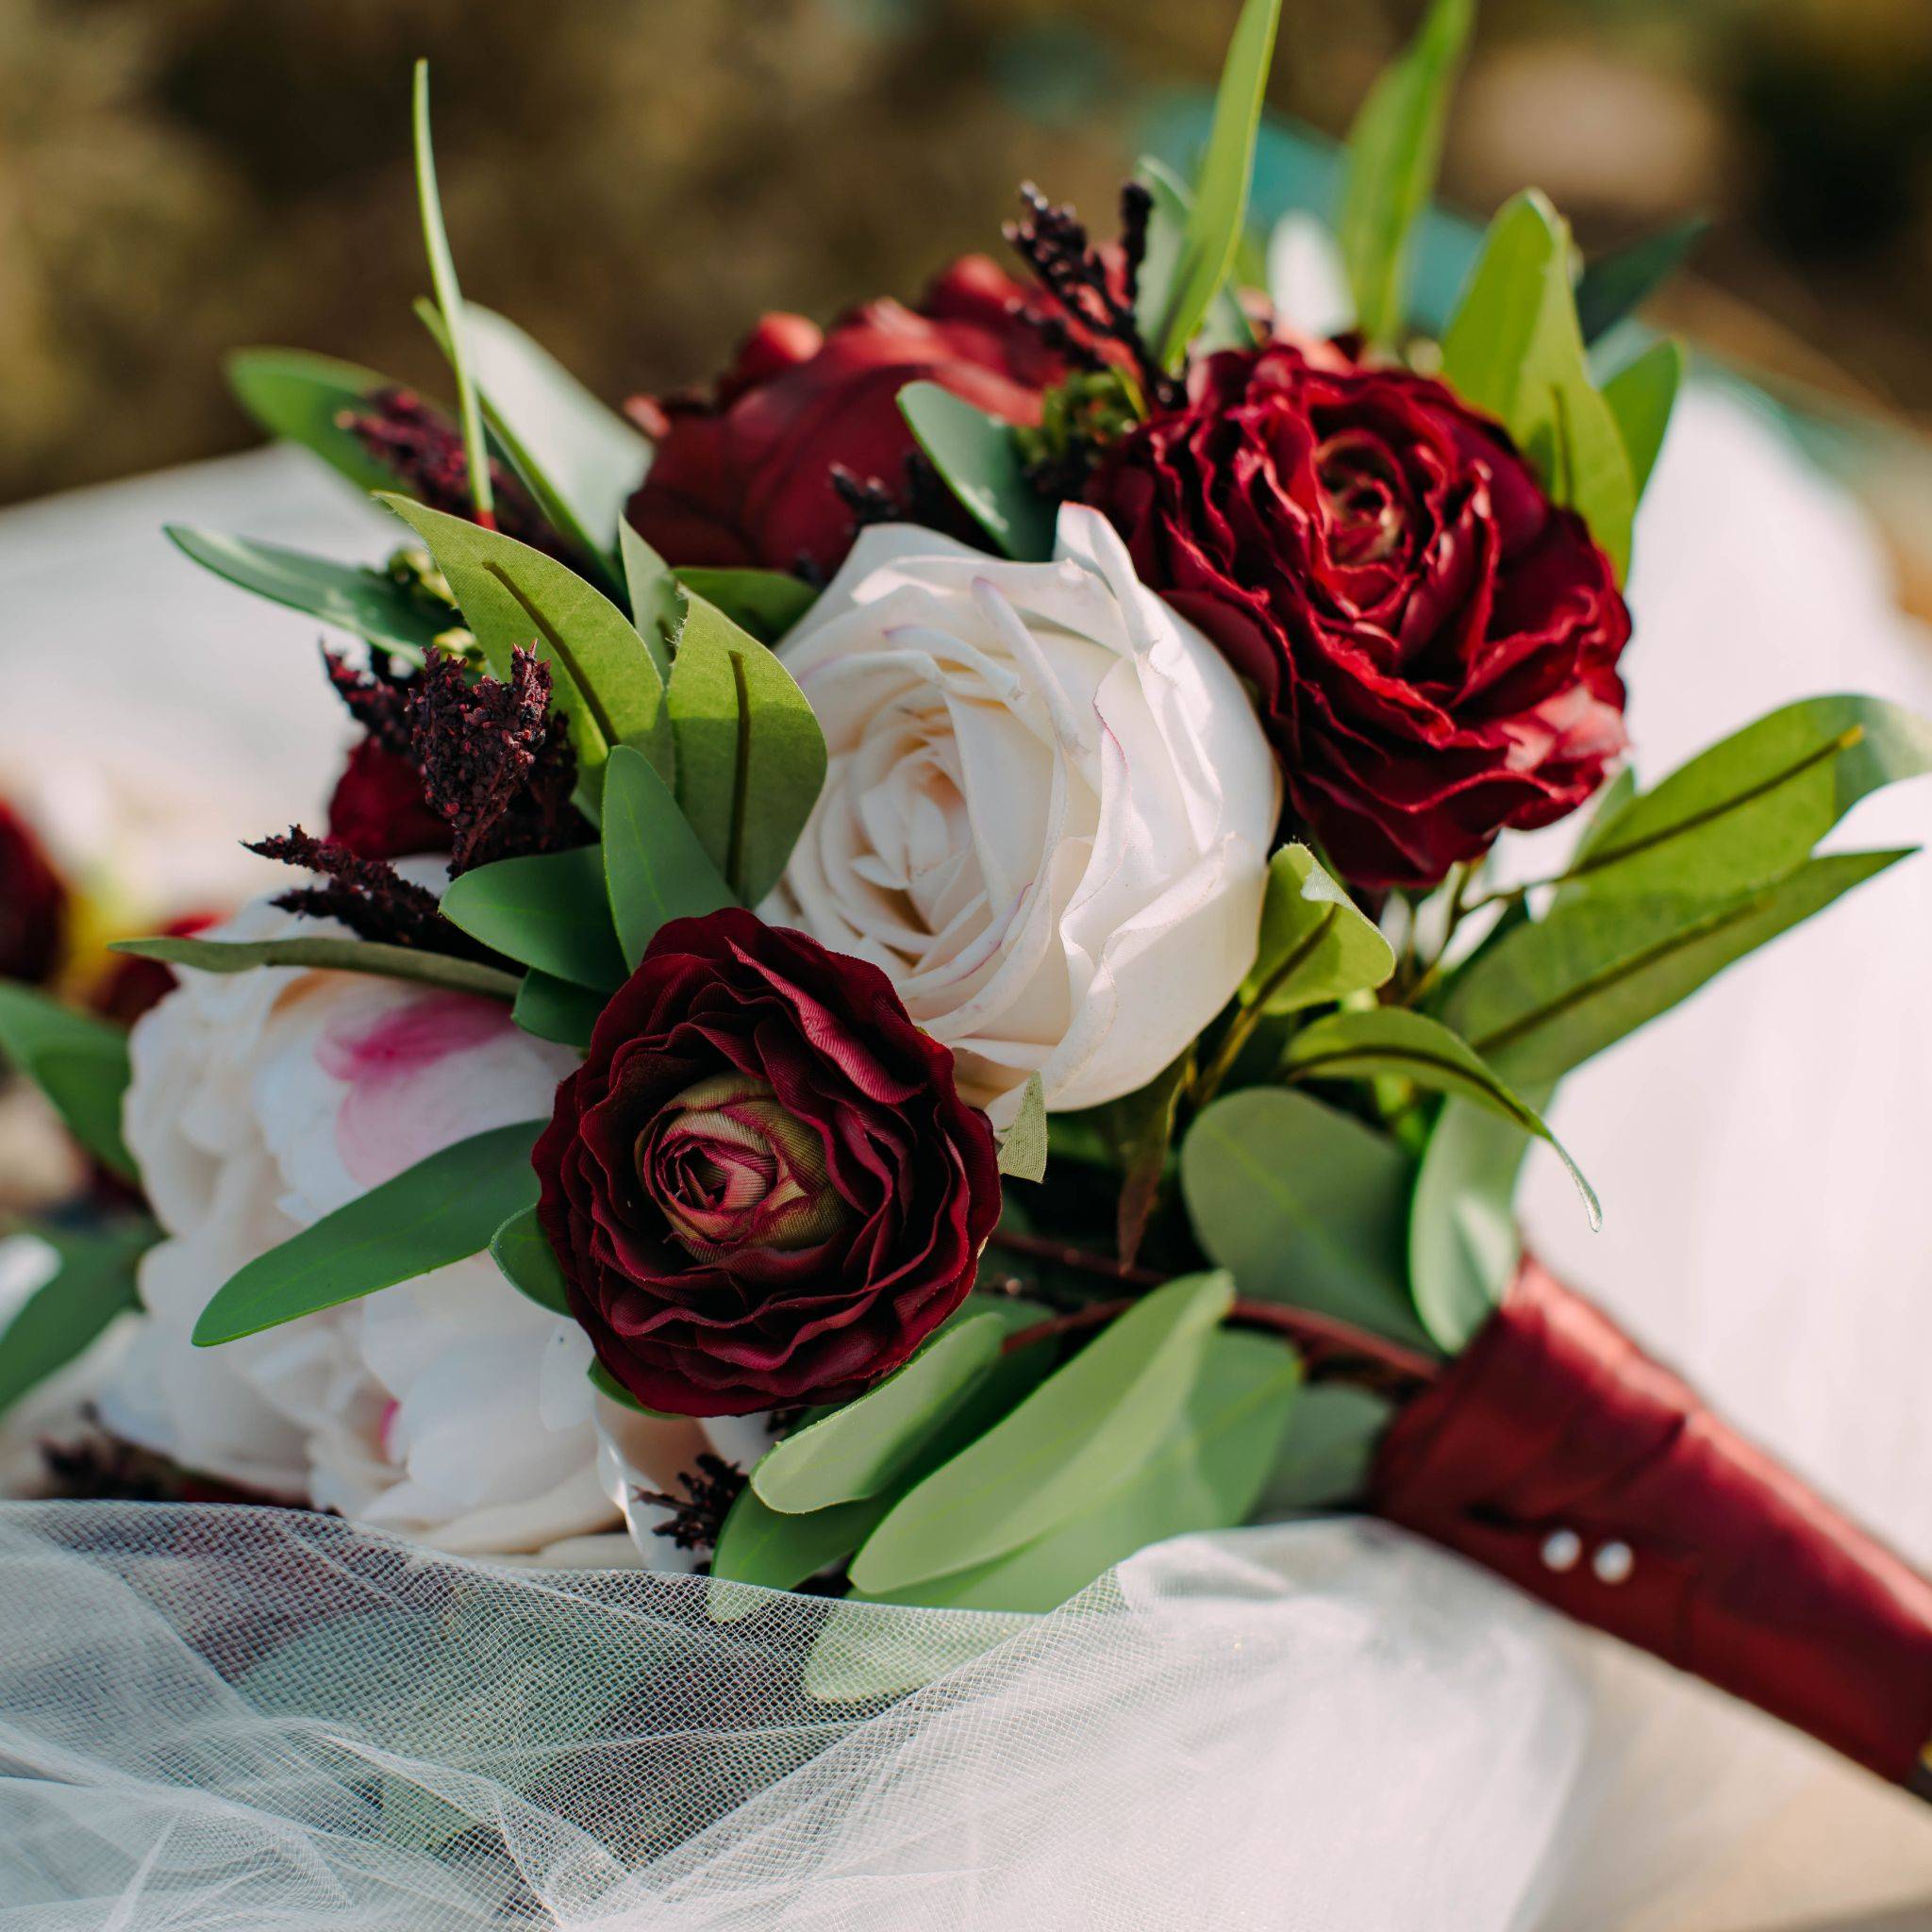 A bouquet made of burgundy ranunculus, blush peonies, and blush cabbage roses with ruscus and seeded eucalyptus is wrapped in burgundy ribbon laying on a bride's veil